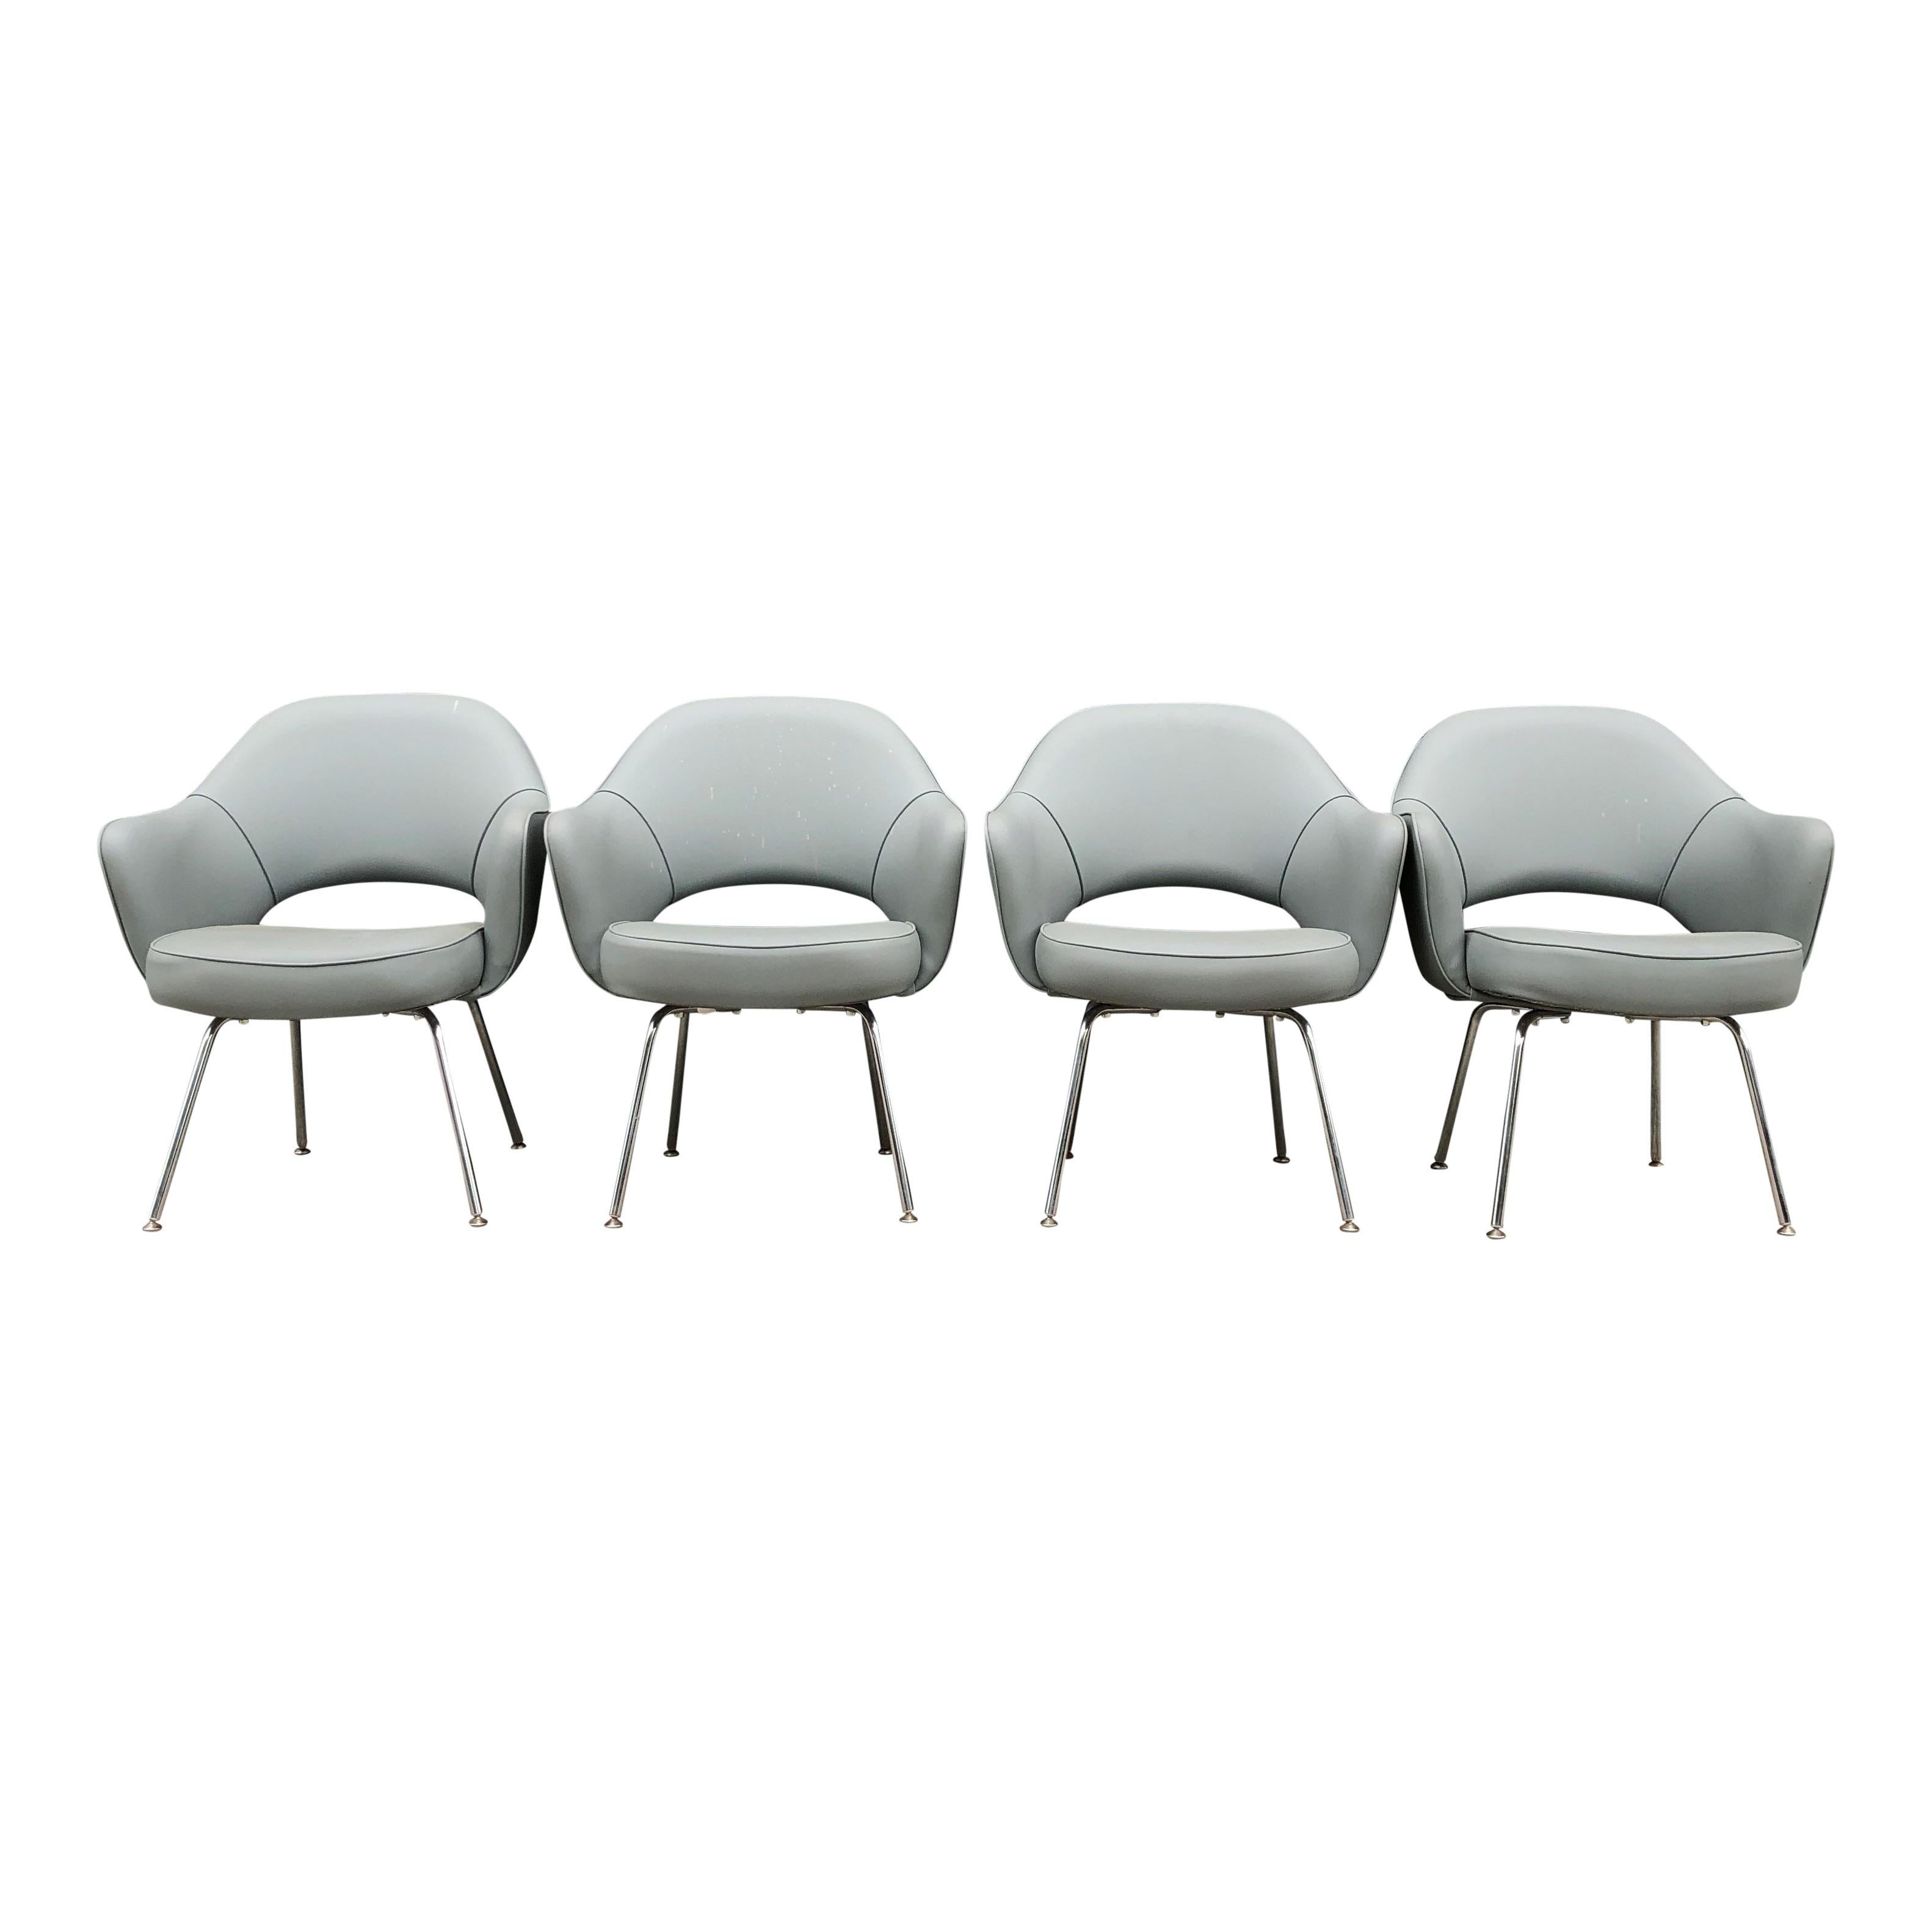 Eero Saarinen for Knoll Executive Chairs for Re-Upholstery